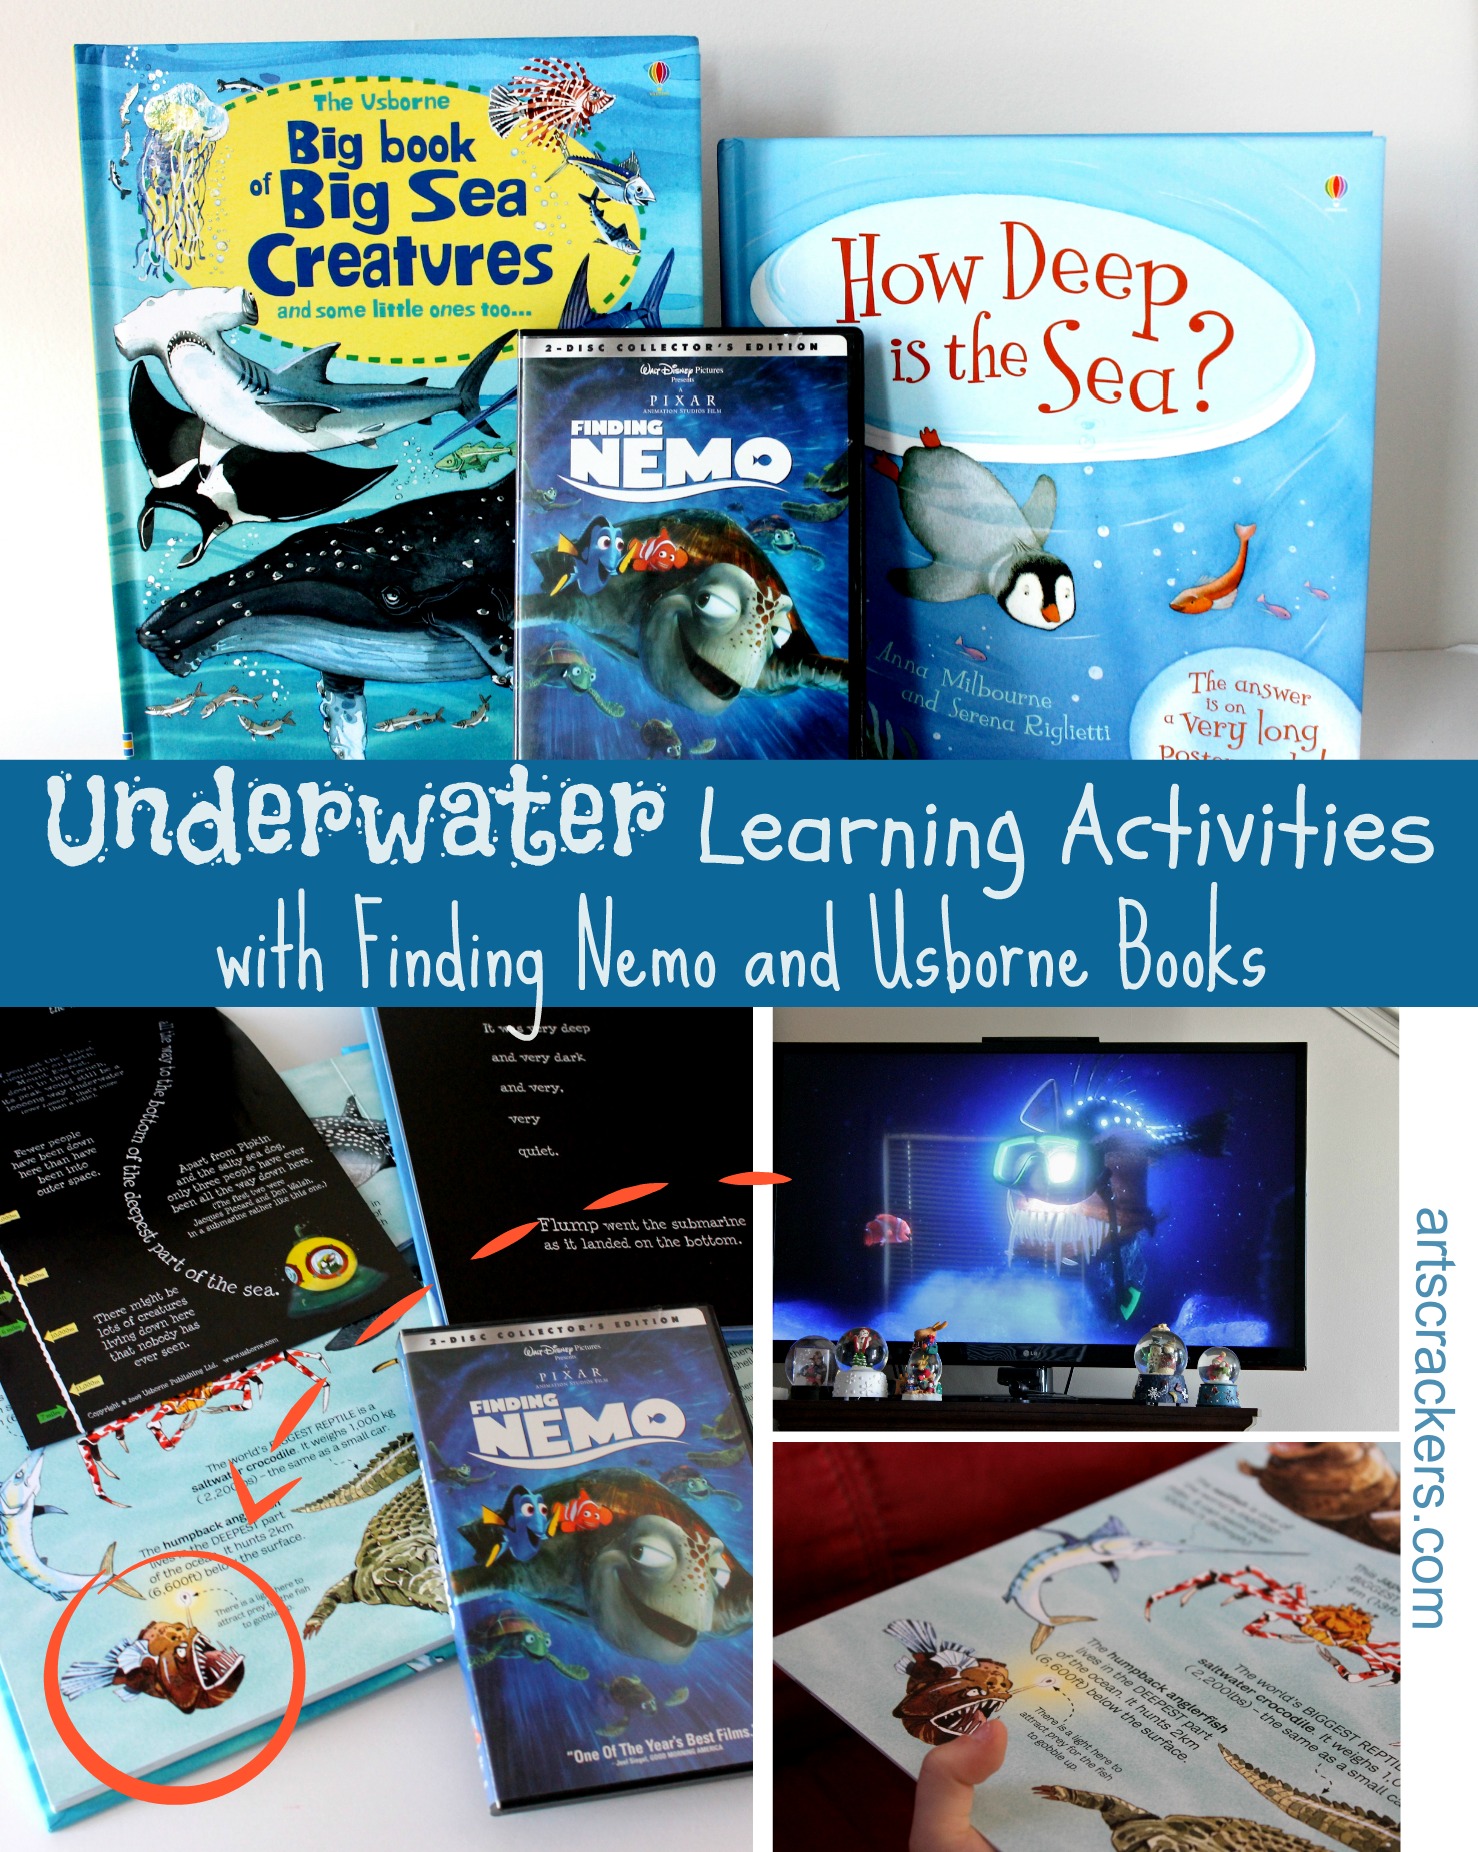 Underwater Learning Activities with Finding Nemo and Usborne Books